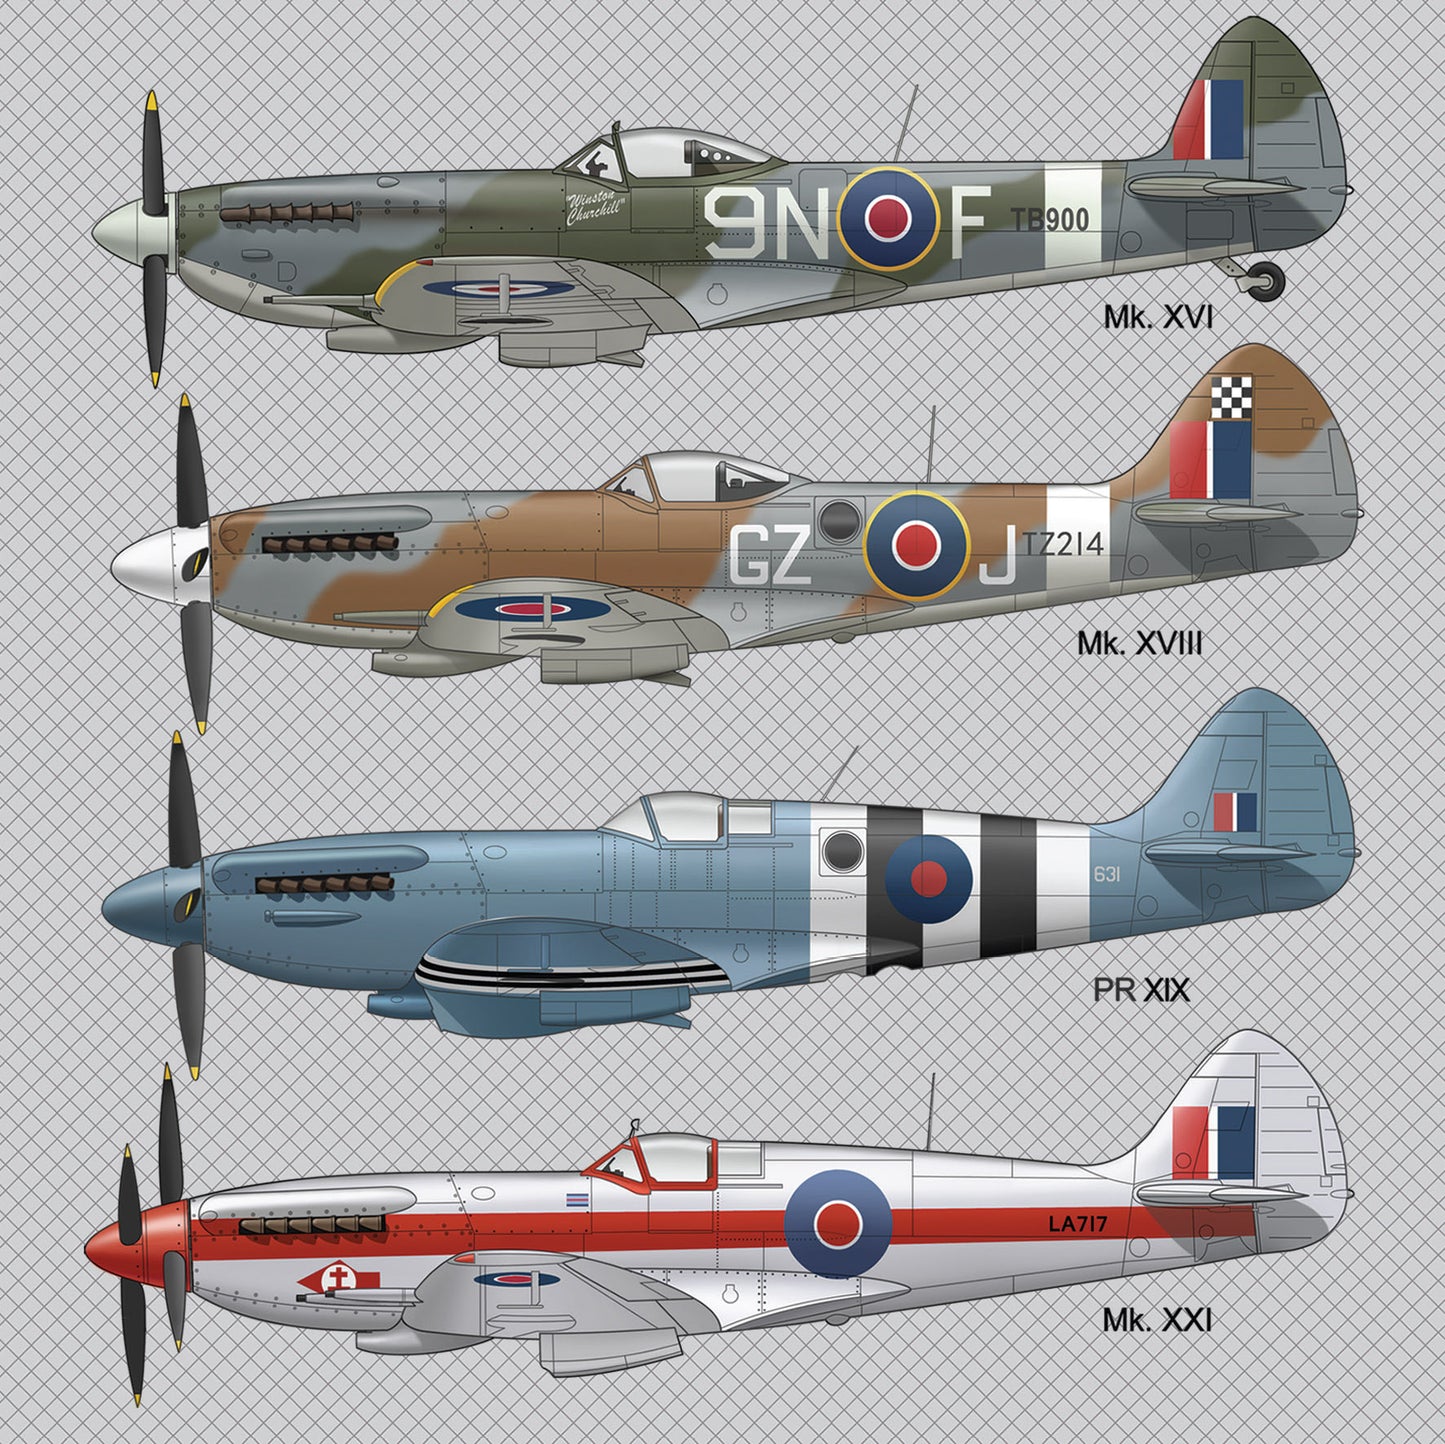 Spitfire Greetings Card (150x150 blank)